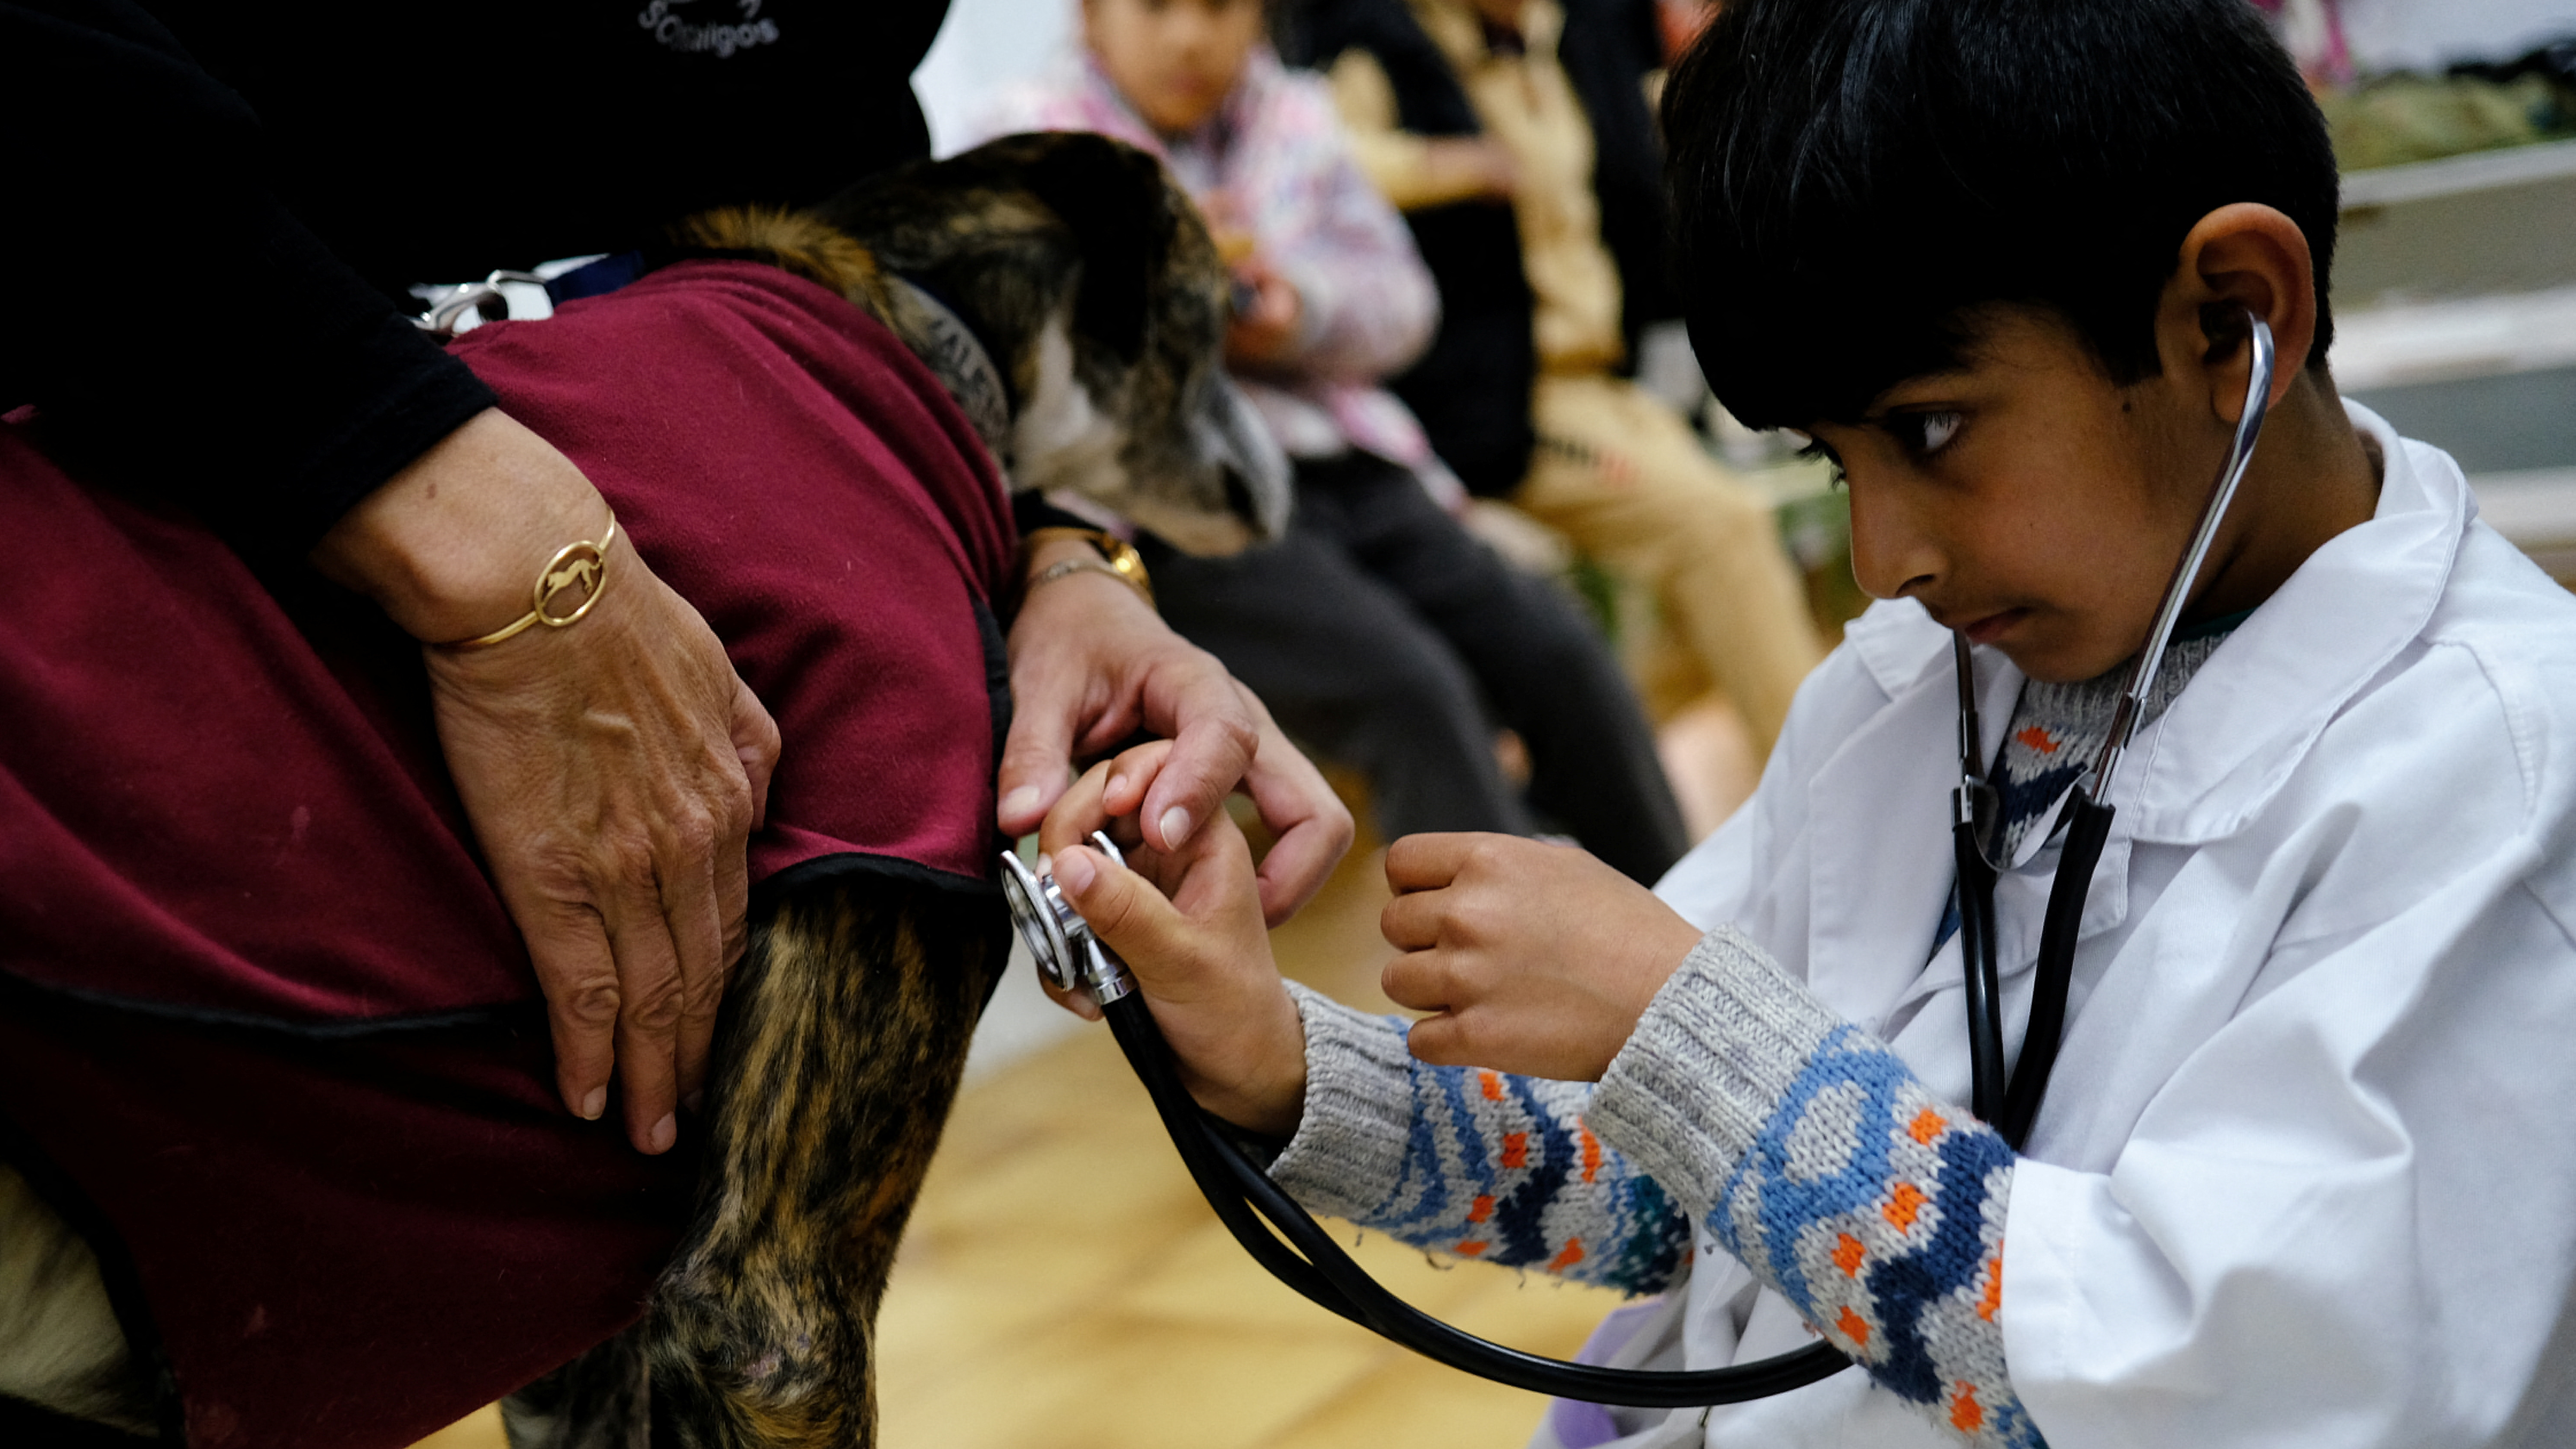 Saud Khalil Zafar Malik, seven, of the Joan Maragall school, acts as a veterinarian as he listens to the heart of a greyhound during a visit to SOS Galgos. /Nacho Doce/Reuters